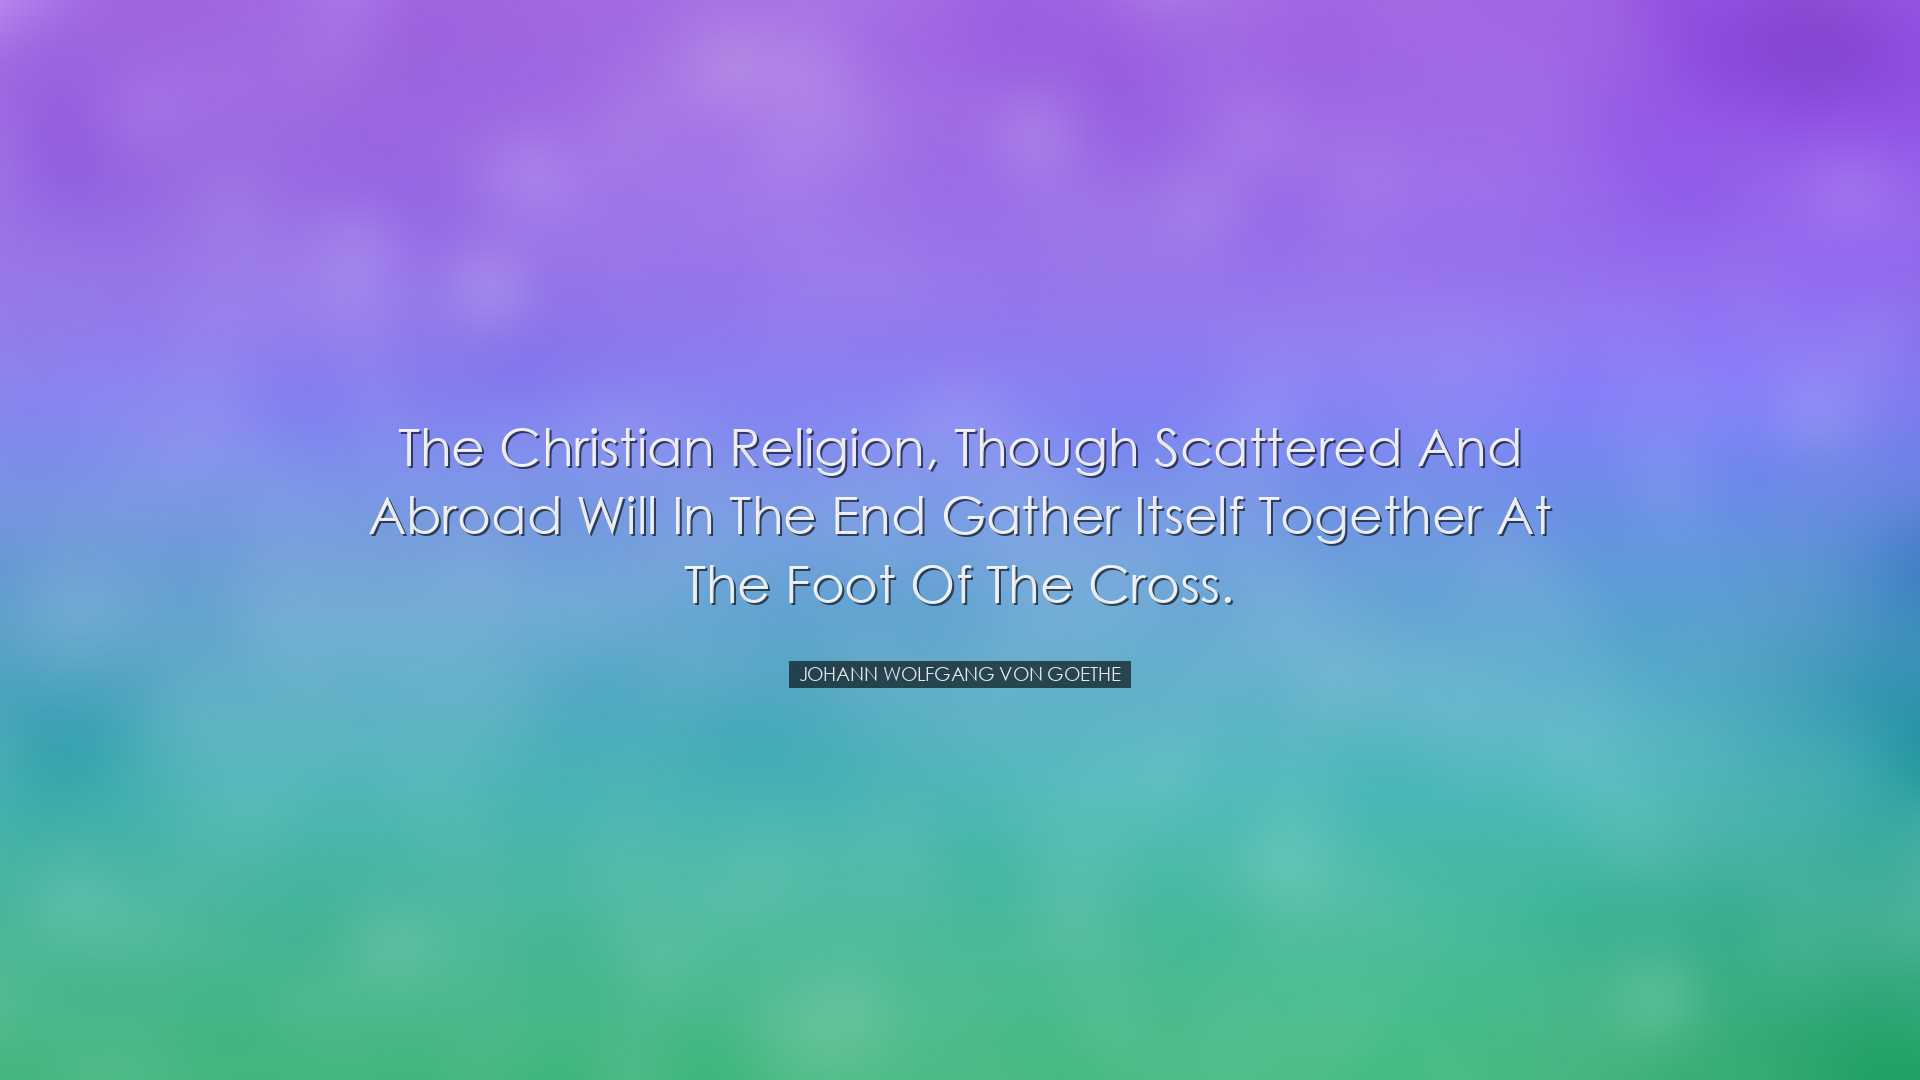 The Christian religion, though scattered and abroad will in the en